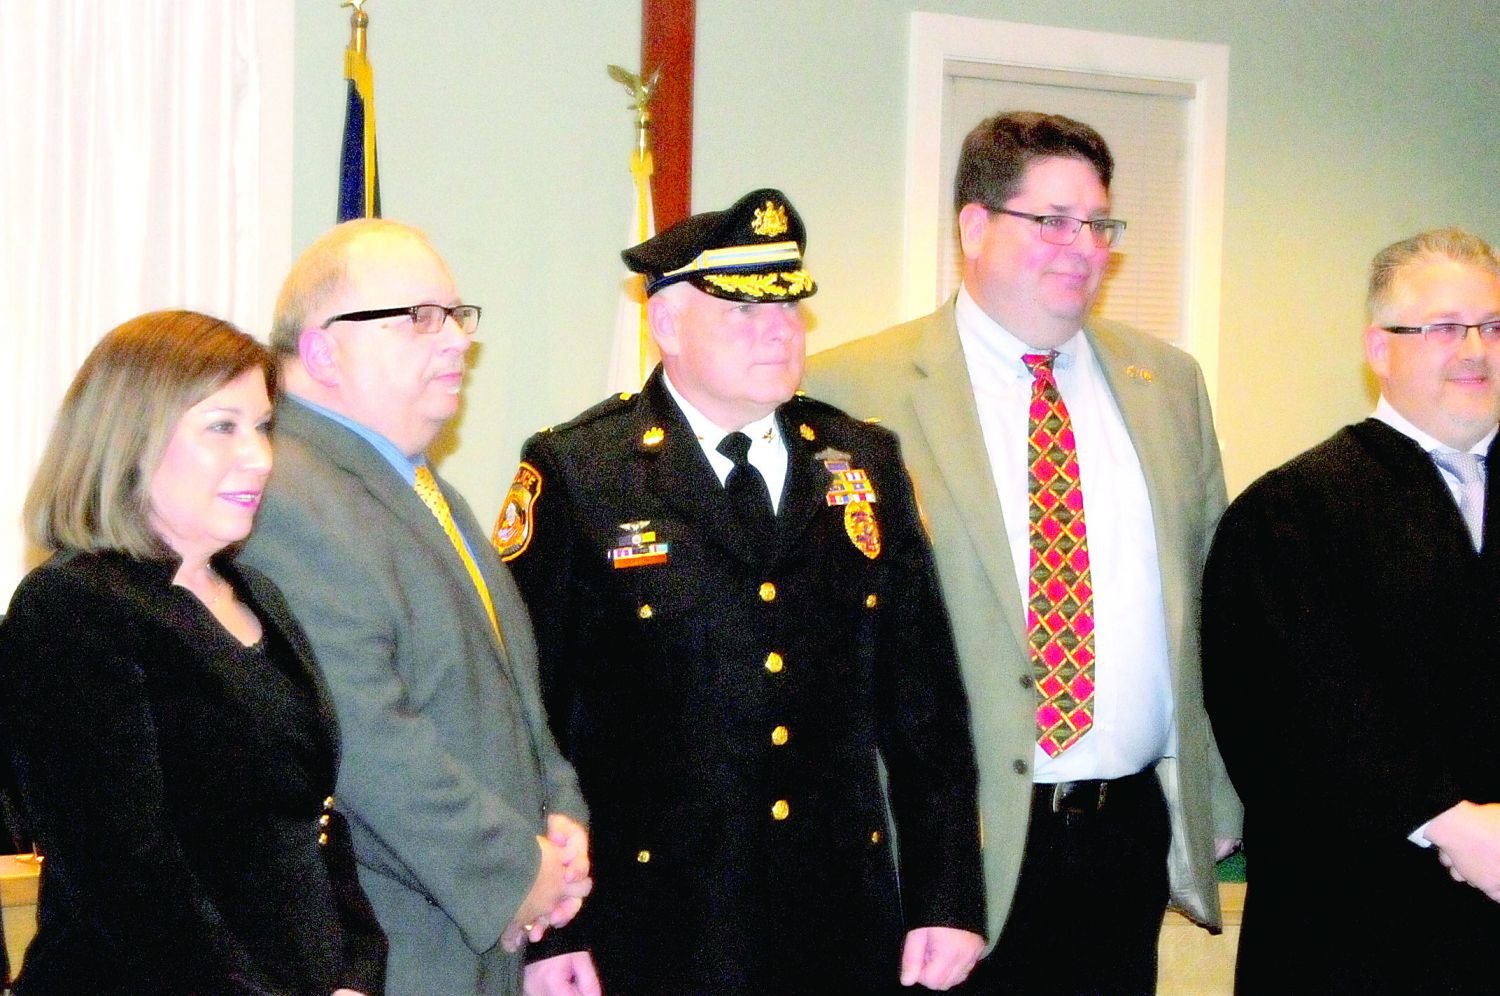 Newtown Township’s Board of Supervisors Vice Chair Linda Bobrin, Chair Phil Calabro, Police Chief John L. Hearn, board member Kyle Davis, and Magisterial Justice Michael Petrucci, who performed the swearing in Feb  27.  Photograph by Steve Sherman